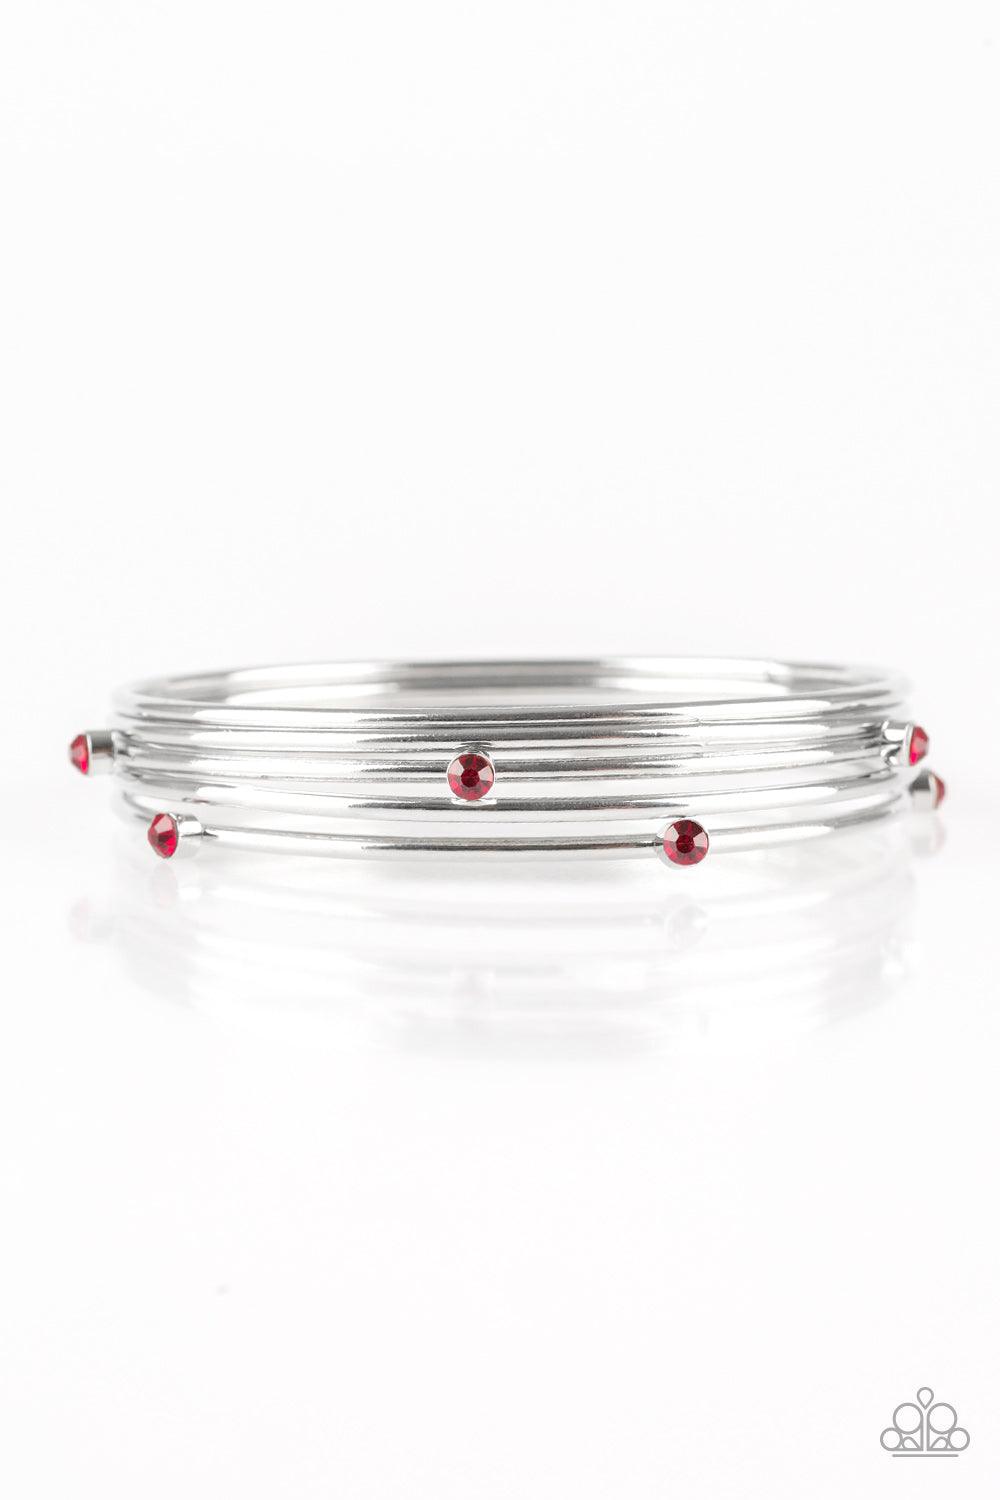 Paparazzi Accessories Delicate Decadence - Red Three shiny silver and two red rhinestone encrusted bangles stack across the wrist for a refined look. Sold as one set of five bracelets. Jewelry